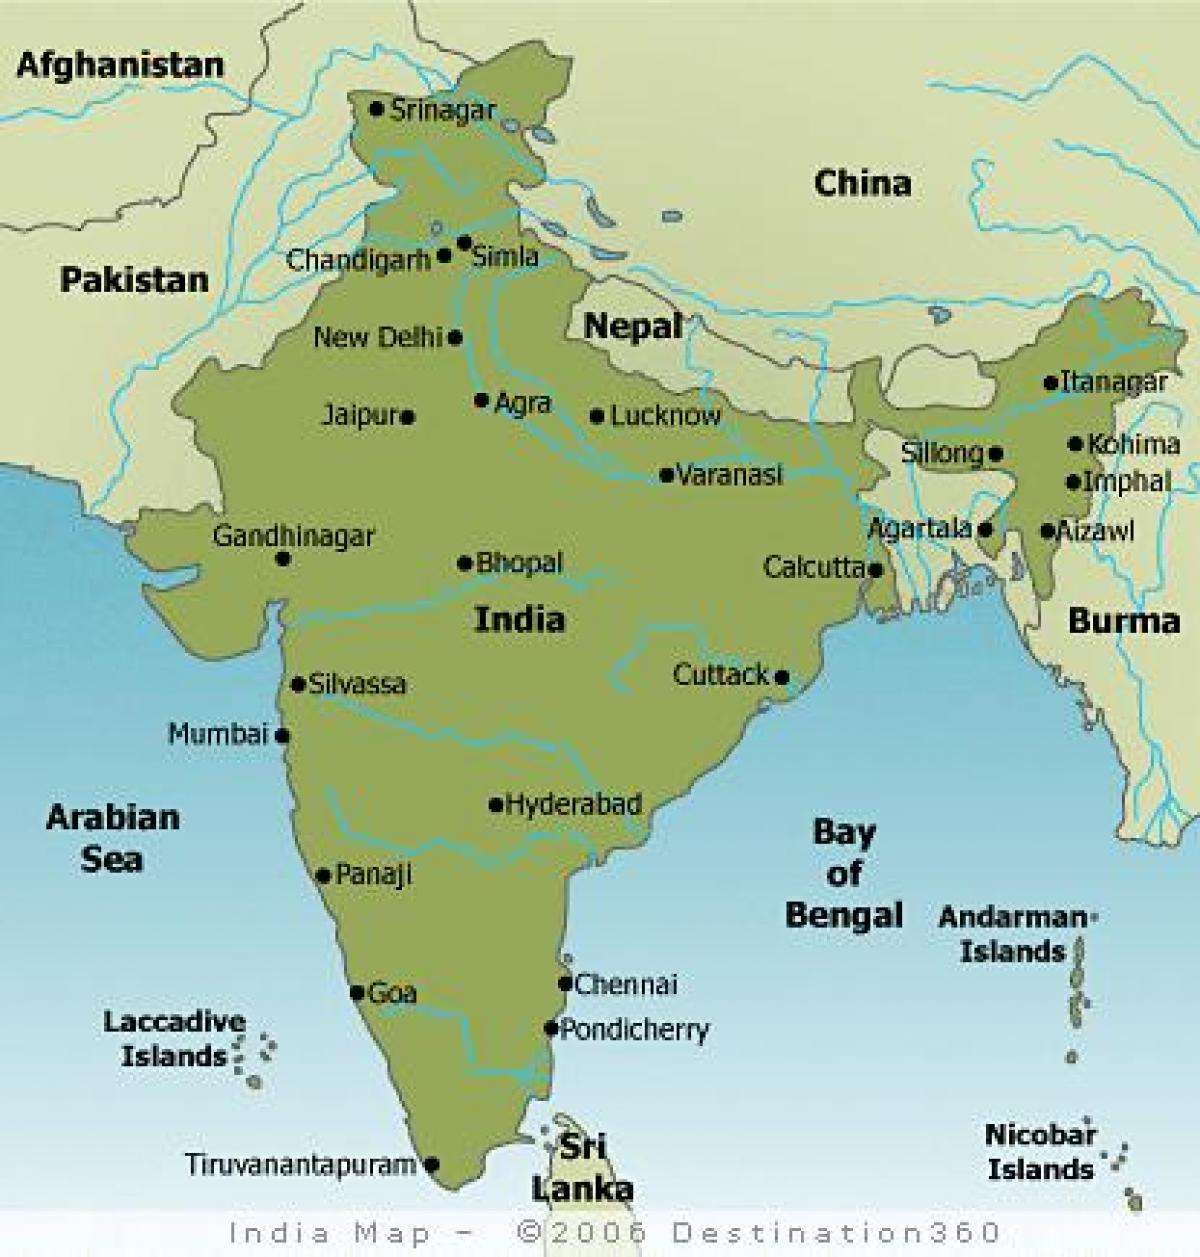 Map Of India Showing The Major Cities And Towns - Bank2home.com